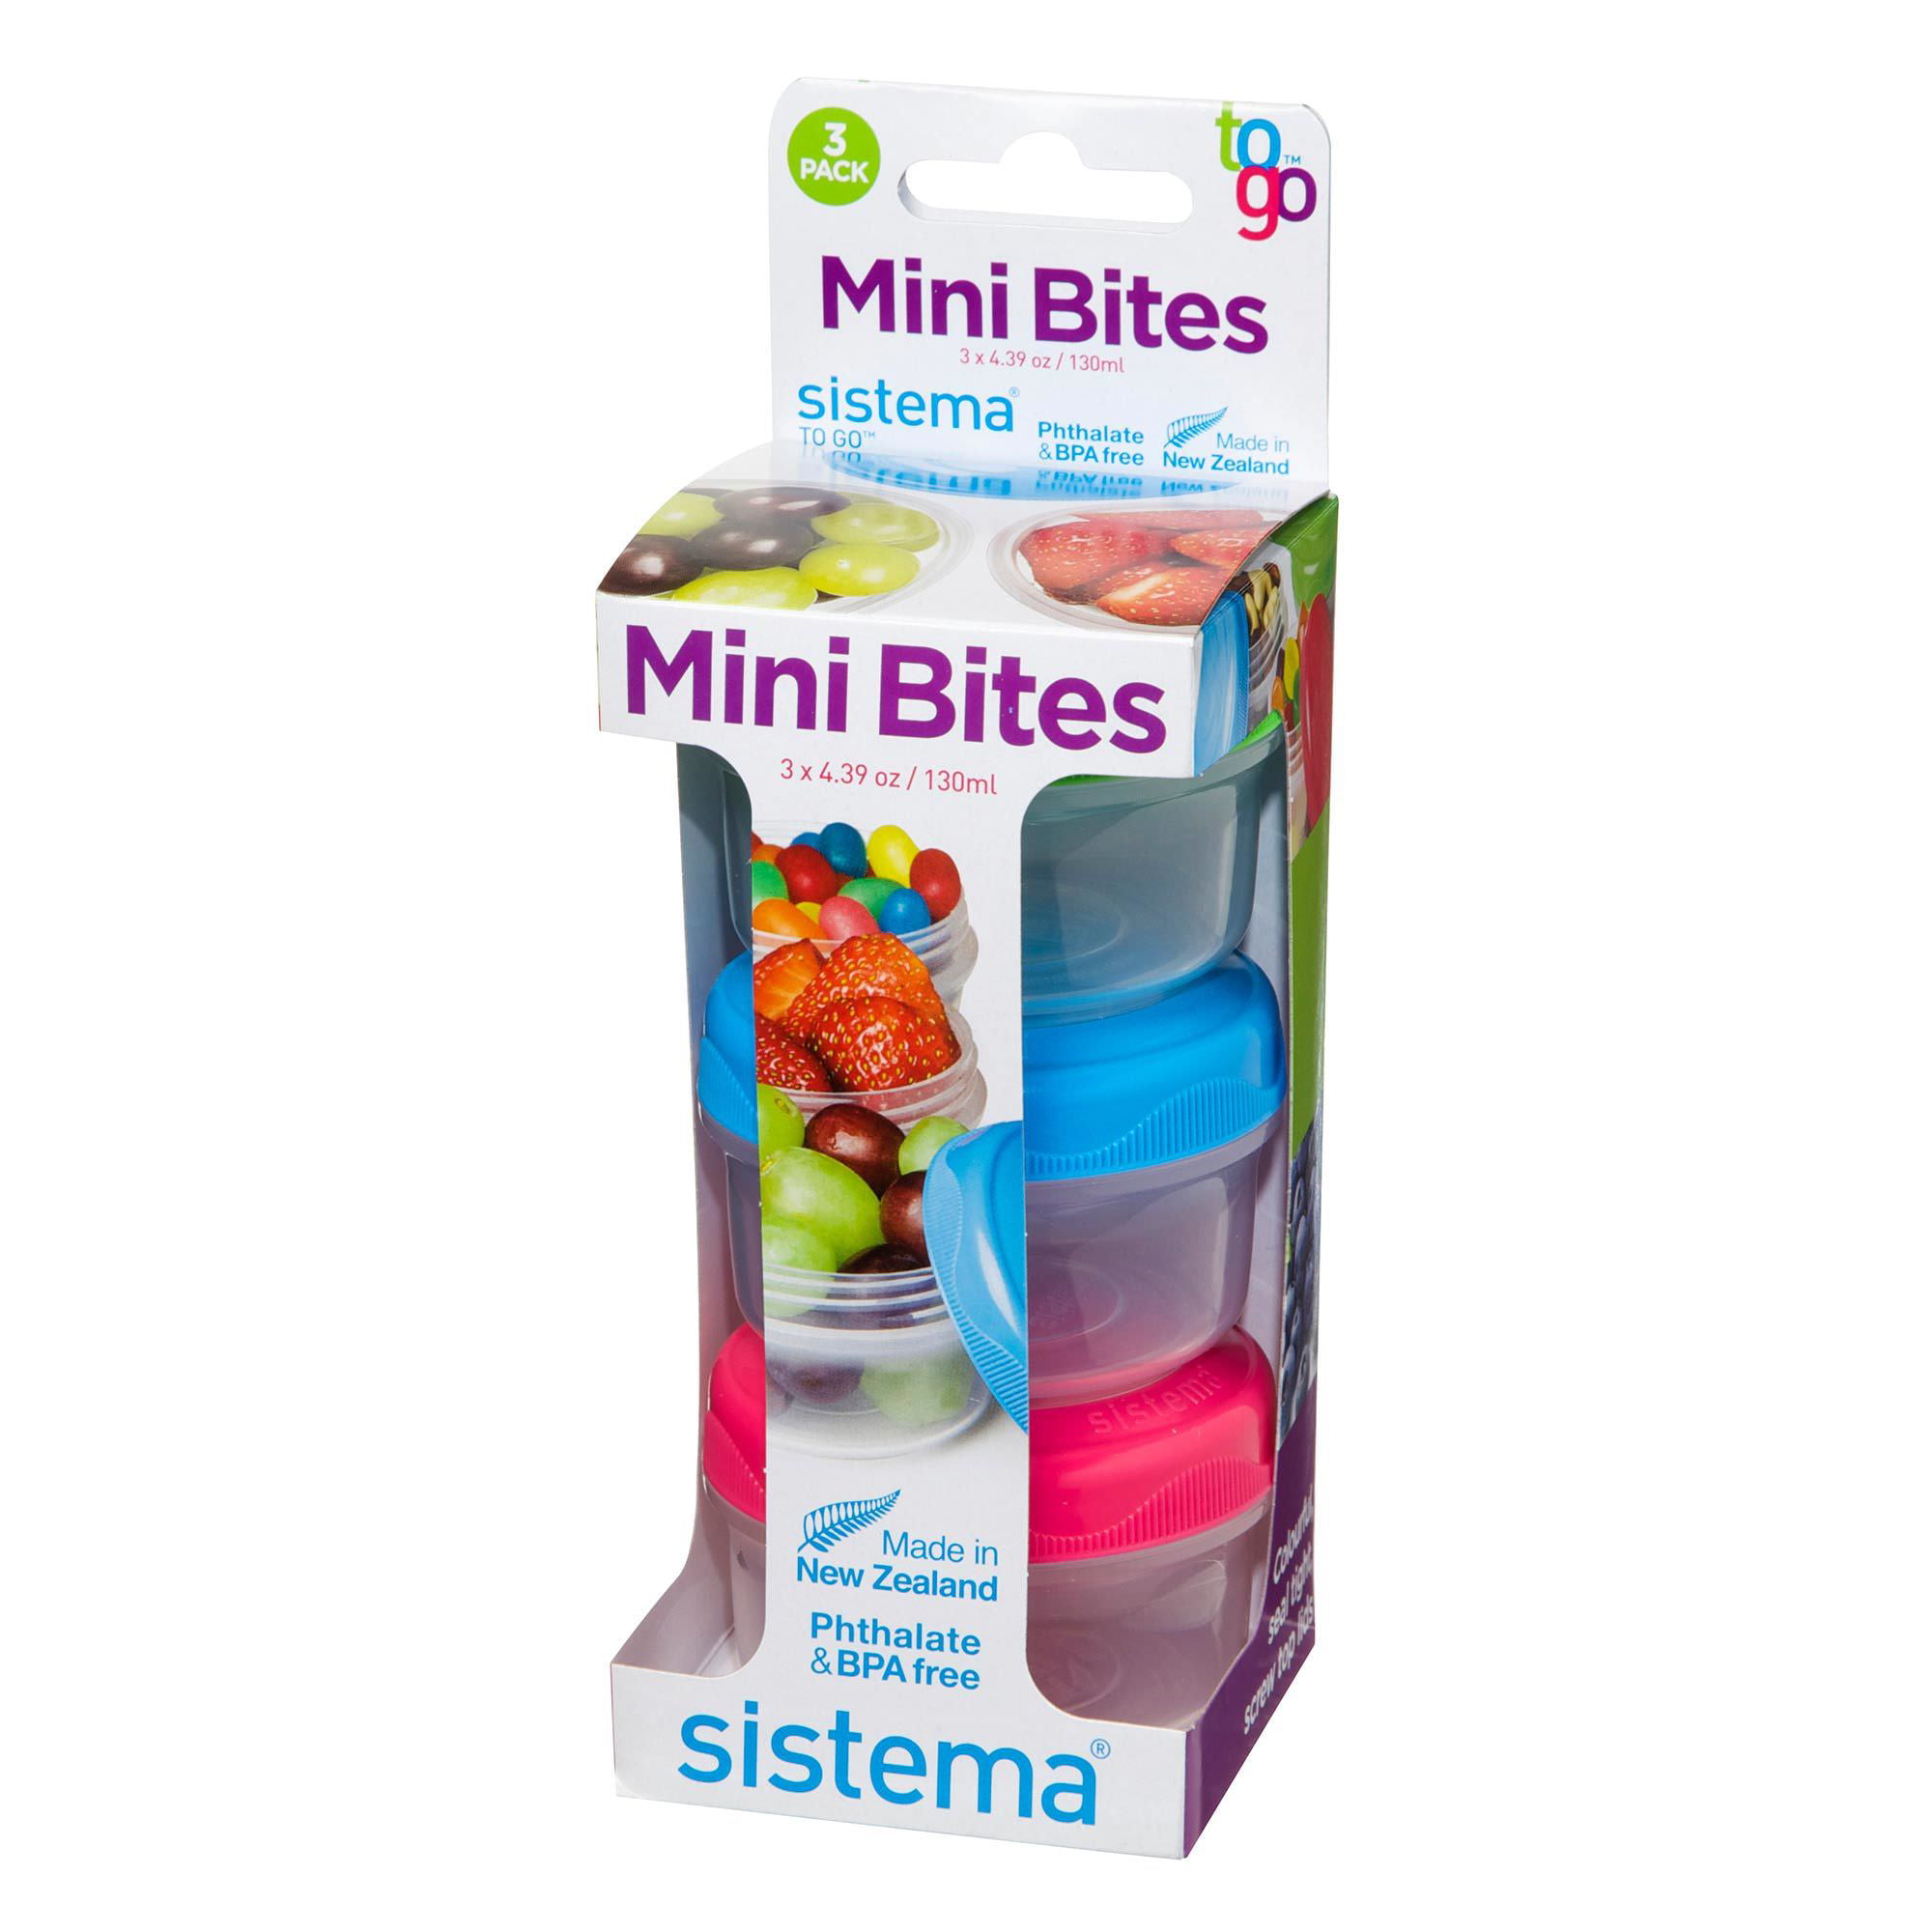 Sistema Plastics - Busy day ahead? Our Mini Bites TO GO™ are great for  taking snacks on the run. What's your favourite snack when you're short on  time?